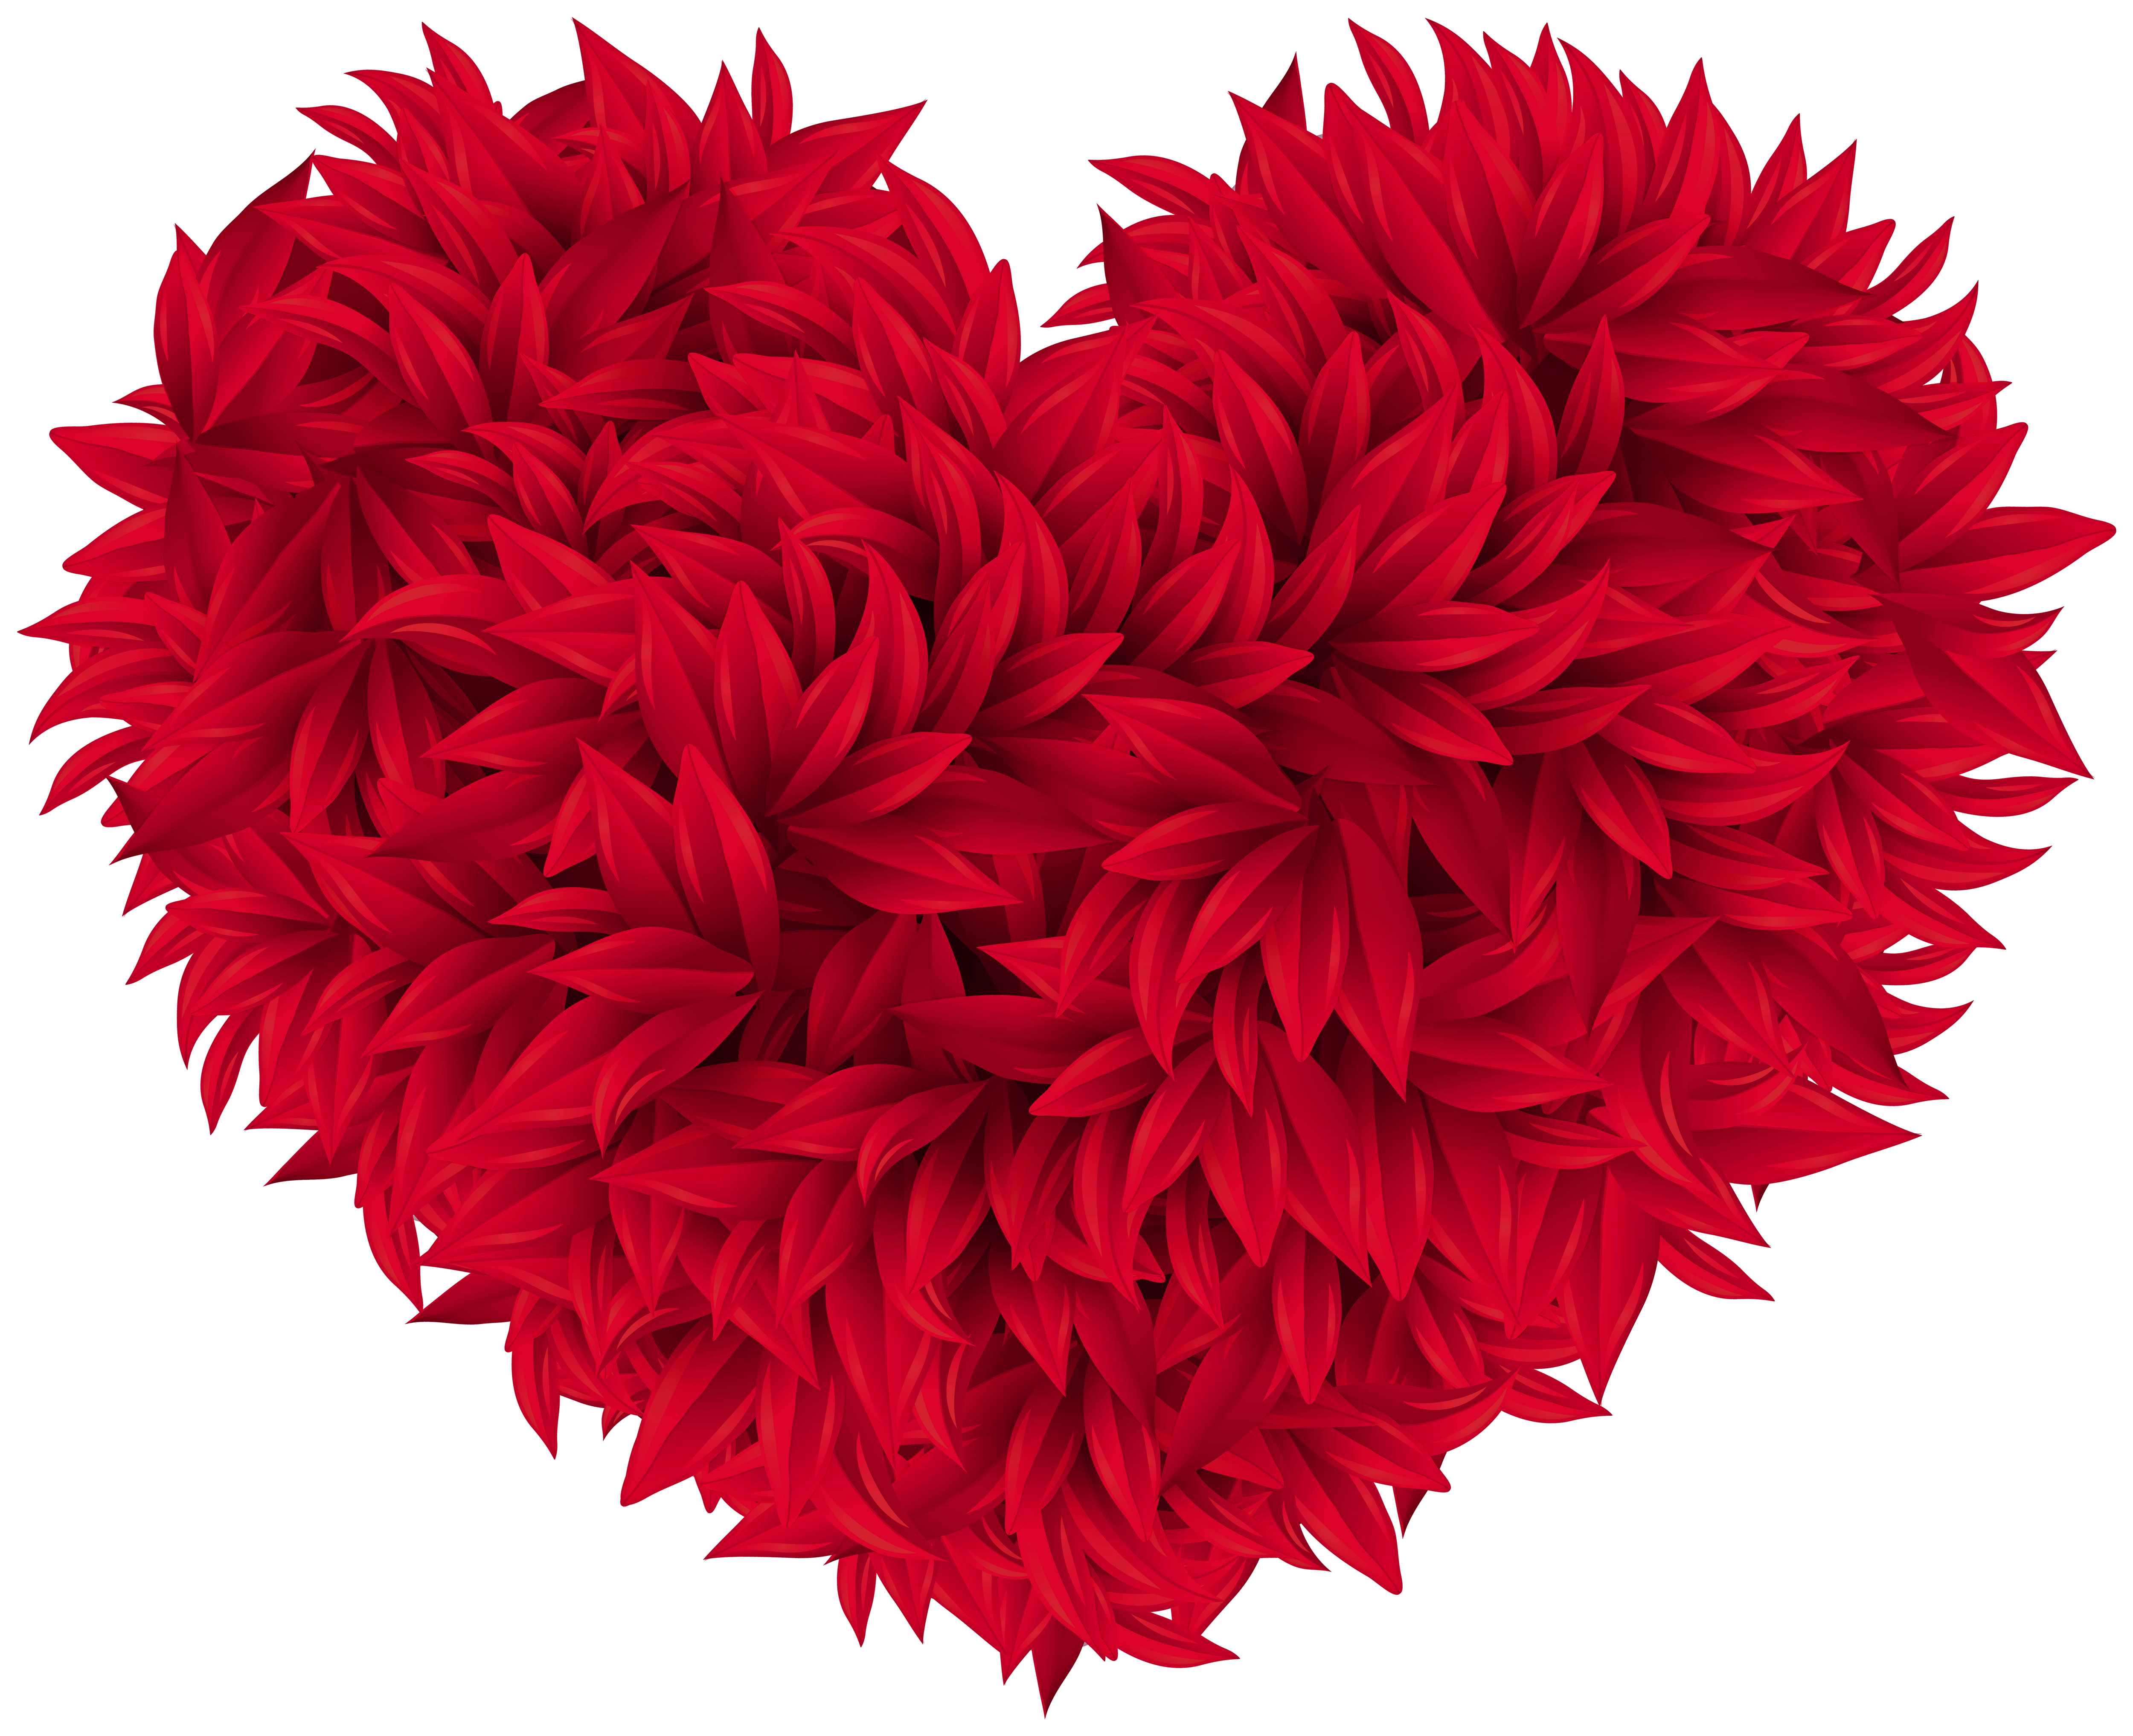 Decorative Red Heart Transparent Image | Gallery Yopriceville - High